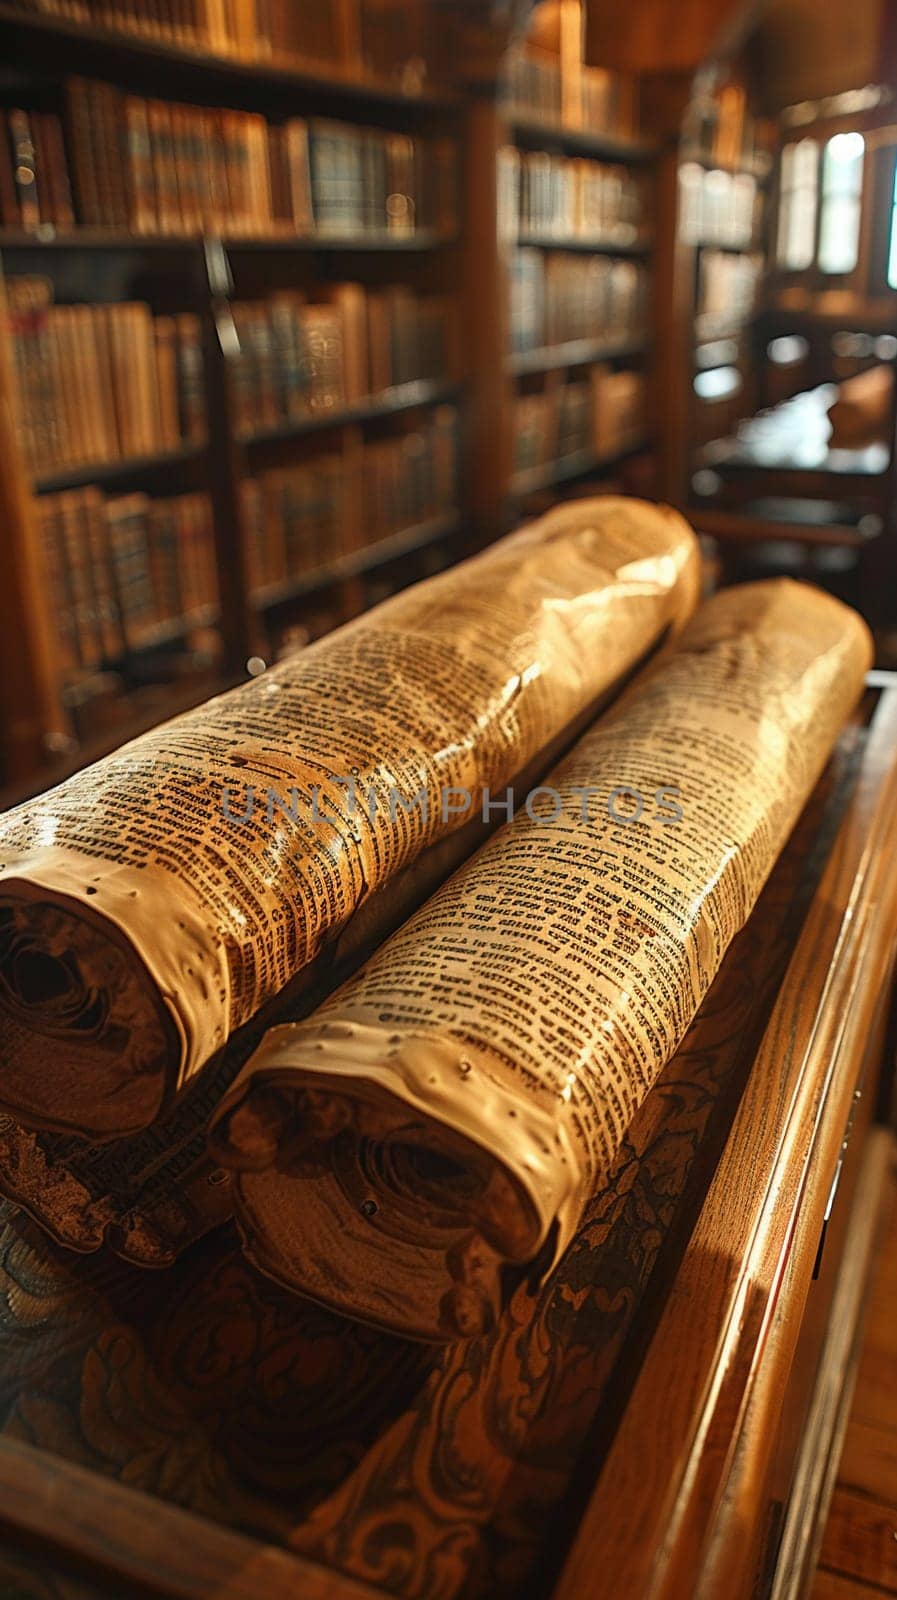 Torah Scrolls Safely Housed in a Softly Lit Ark The sacred text blurs slightly by Benzoix